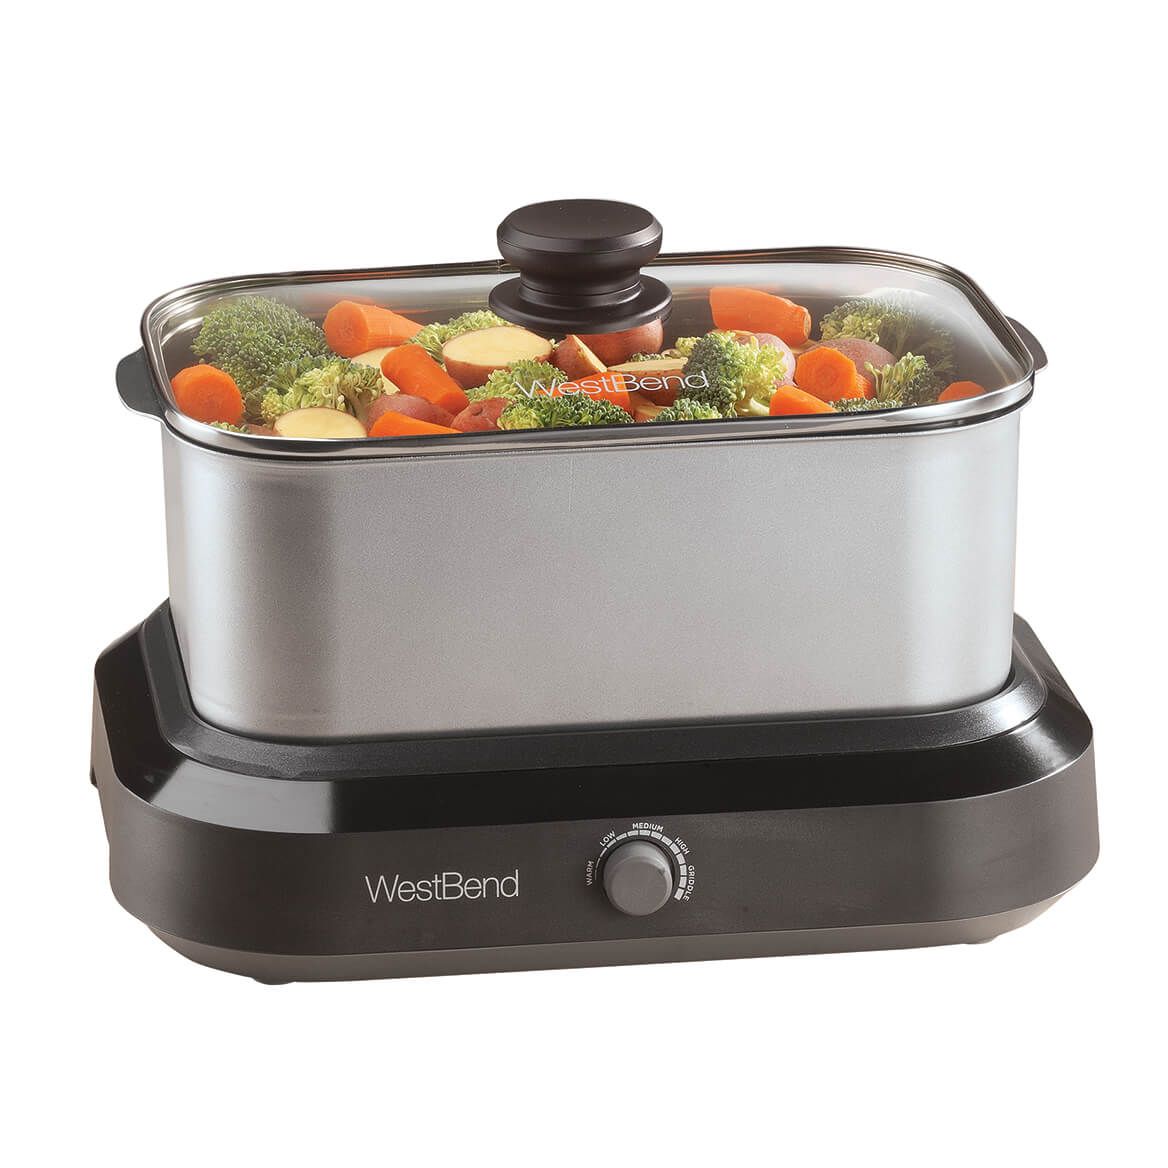 West Bend® 5 Qt. Versatility Cooker™ Stainless Steel + '-' + 363834